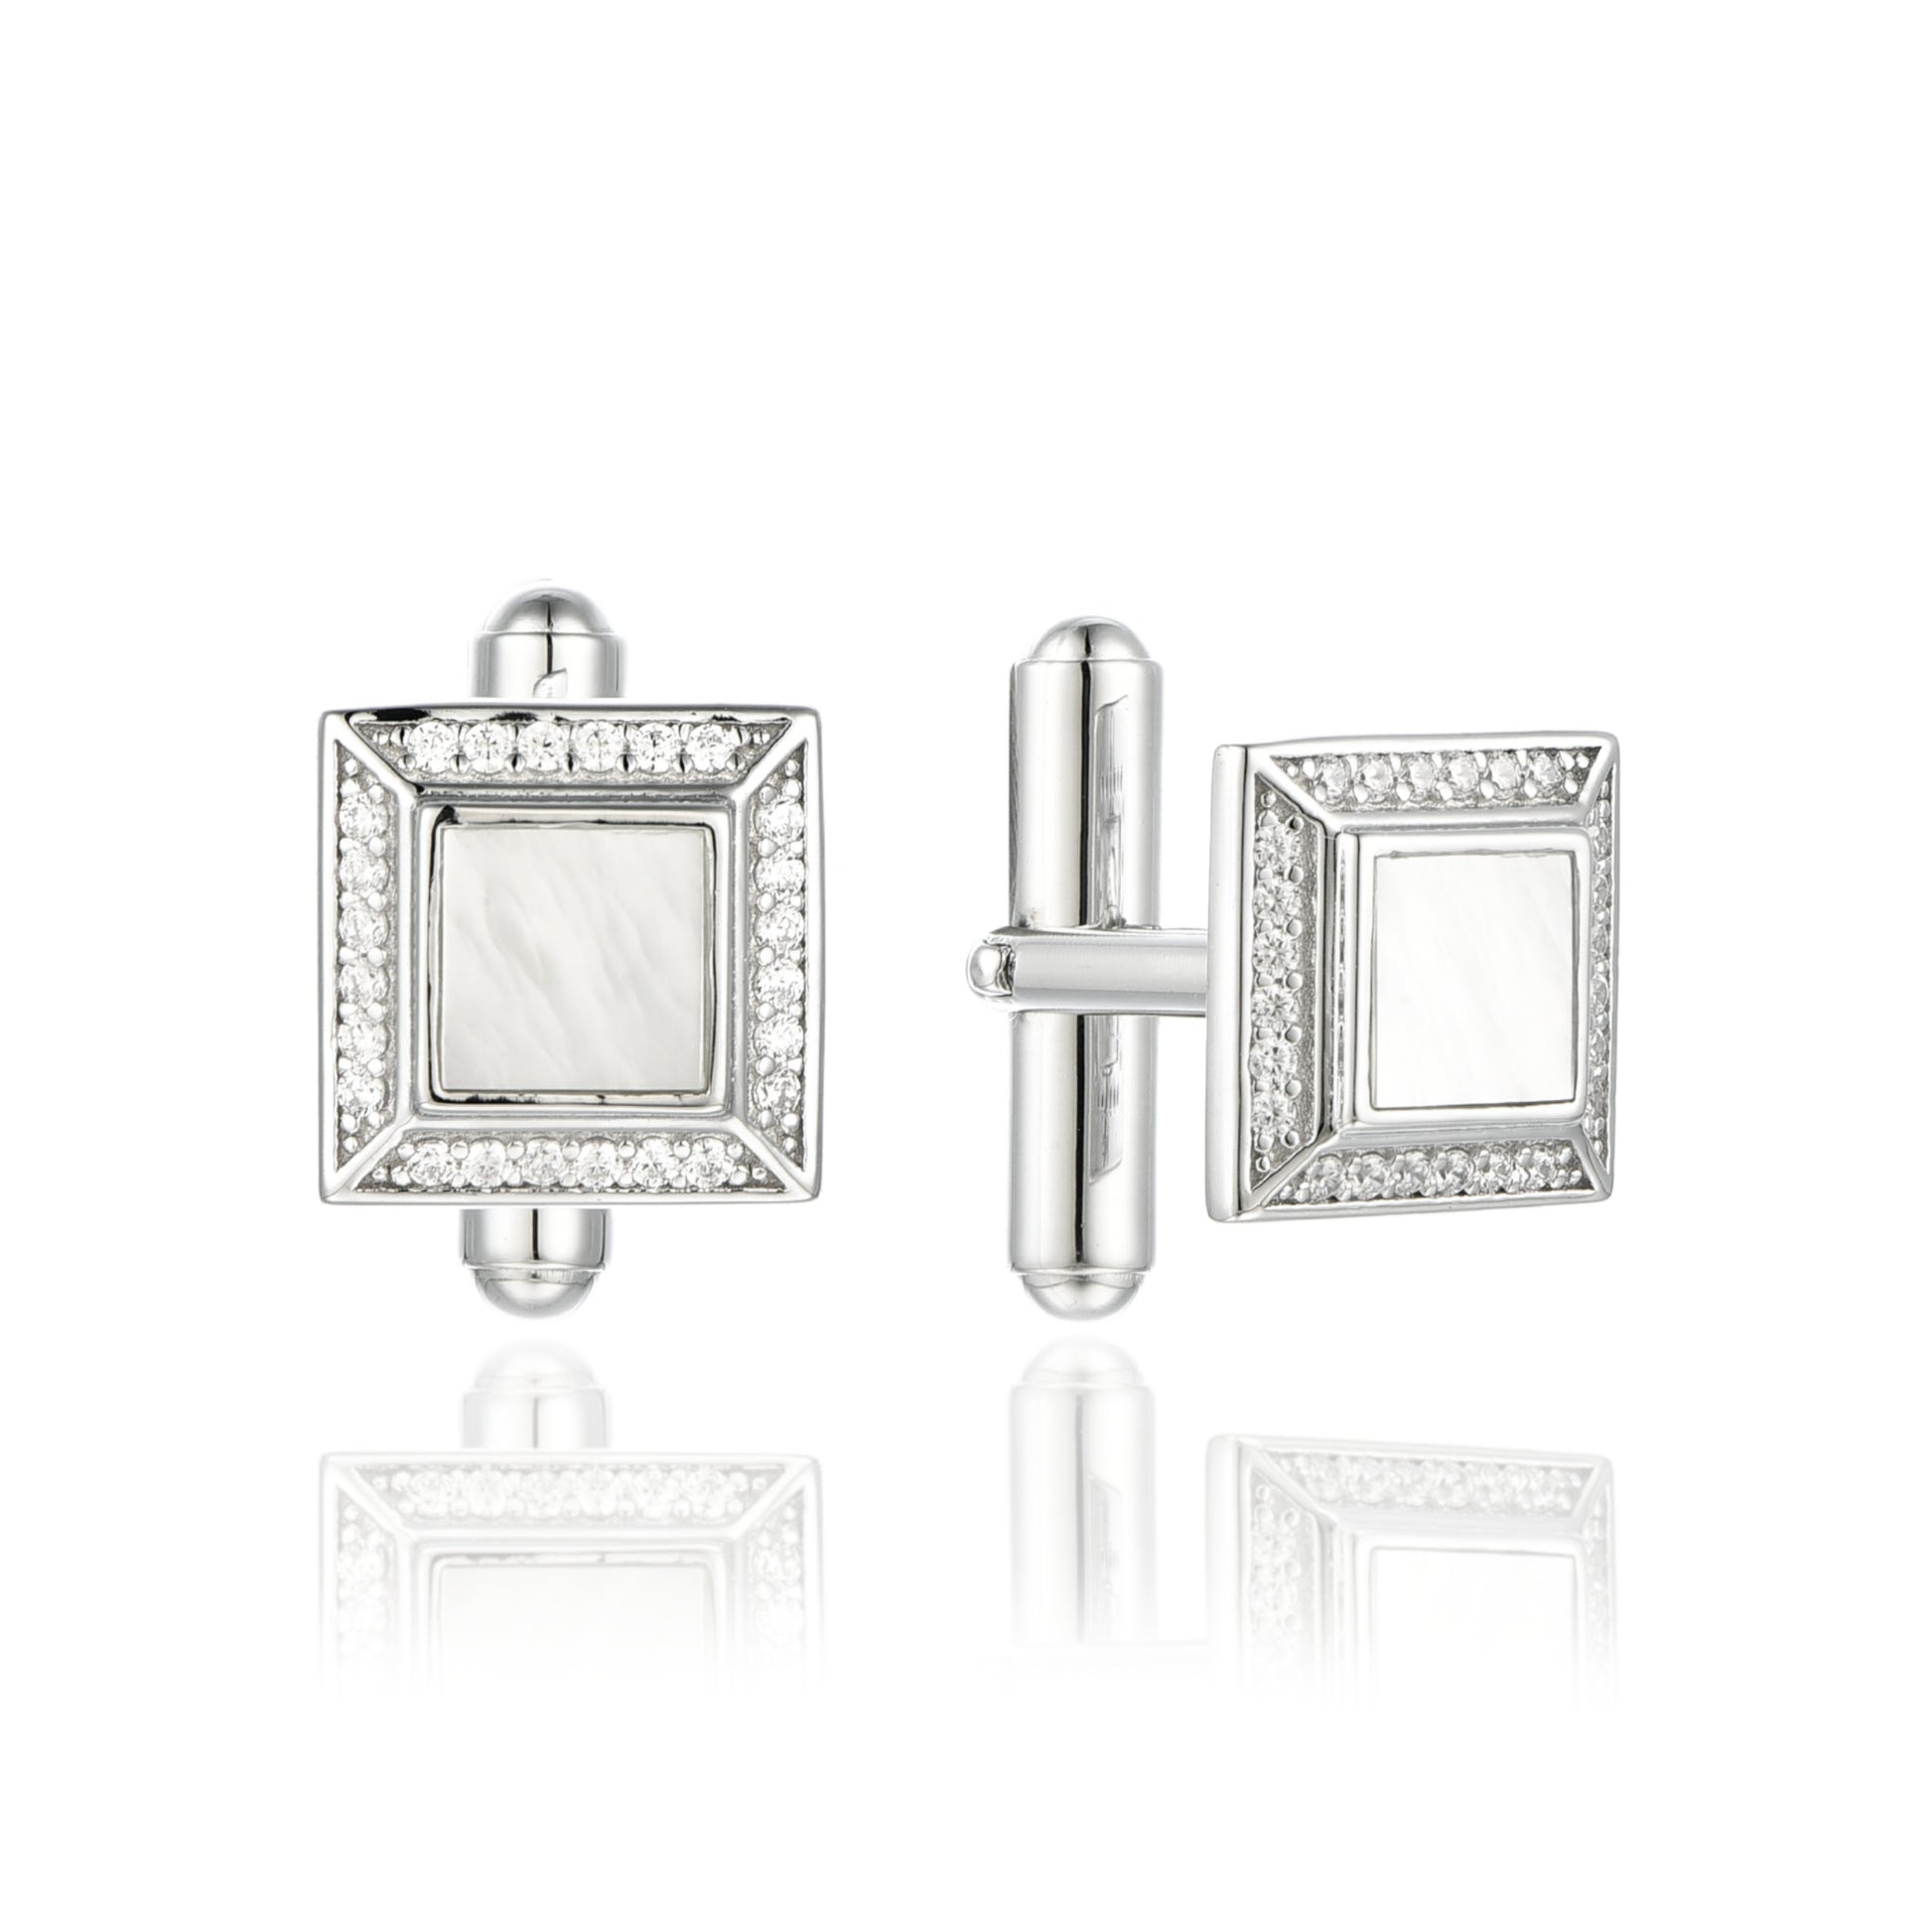 Sterling Silver Micropave 3D Square Cufflinks With White Shell Center - HK Jewels